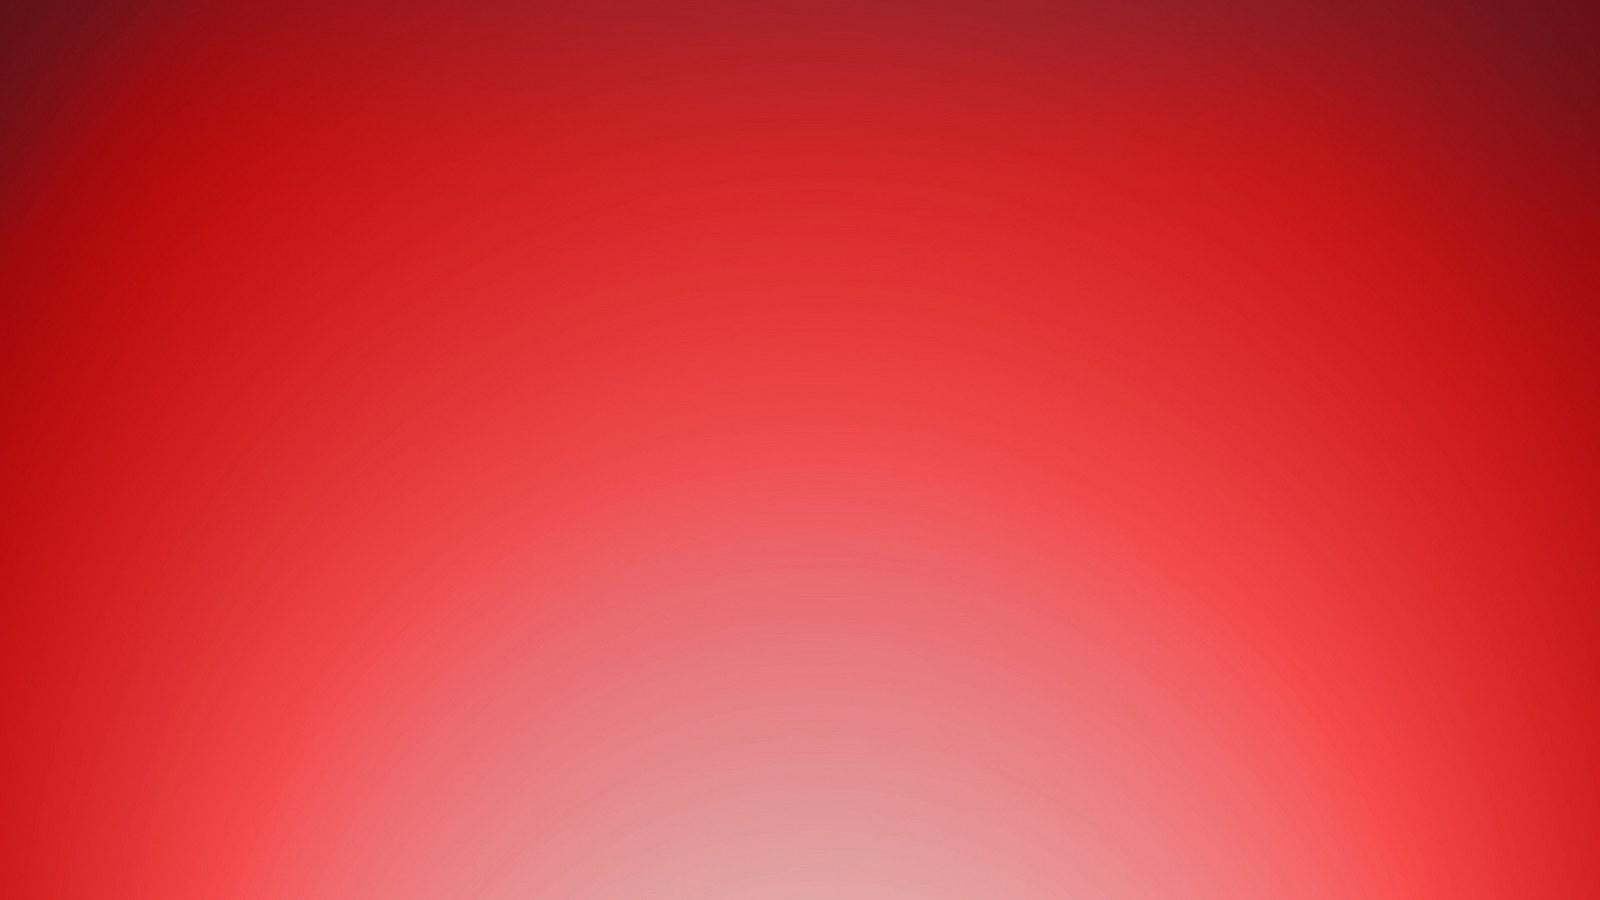 Free download red backgrounds HD Wallpapers Download red